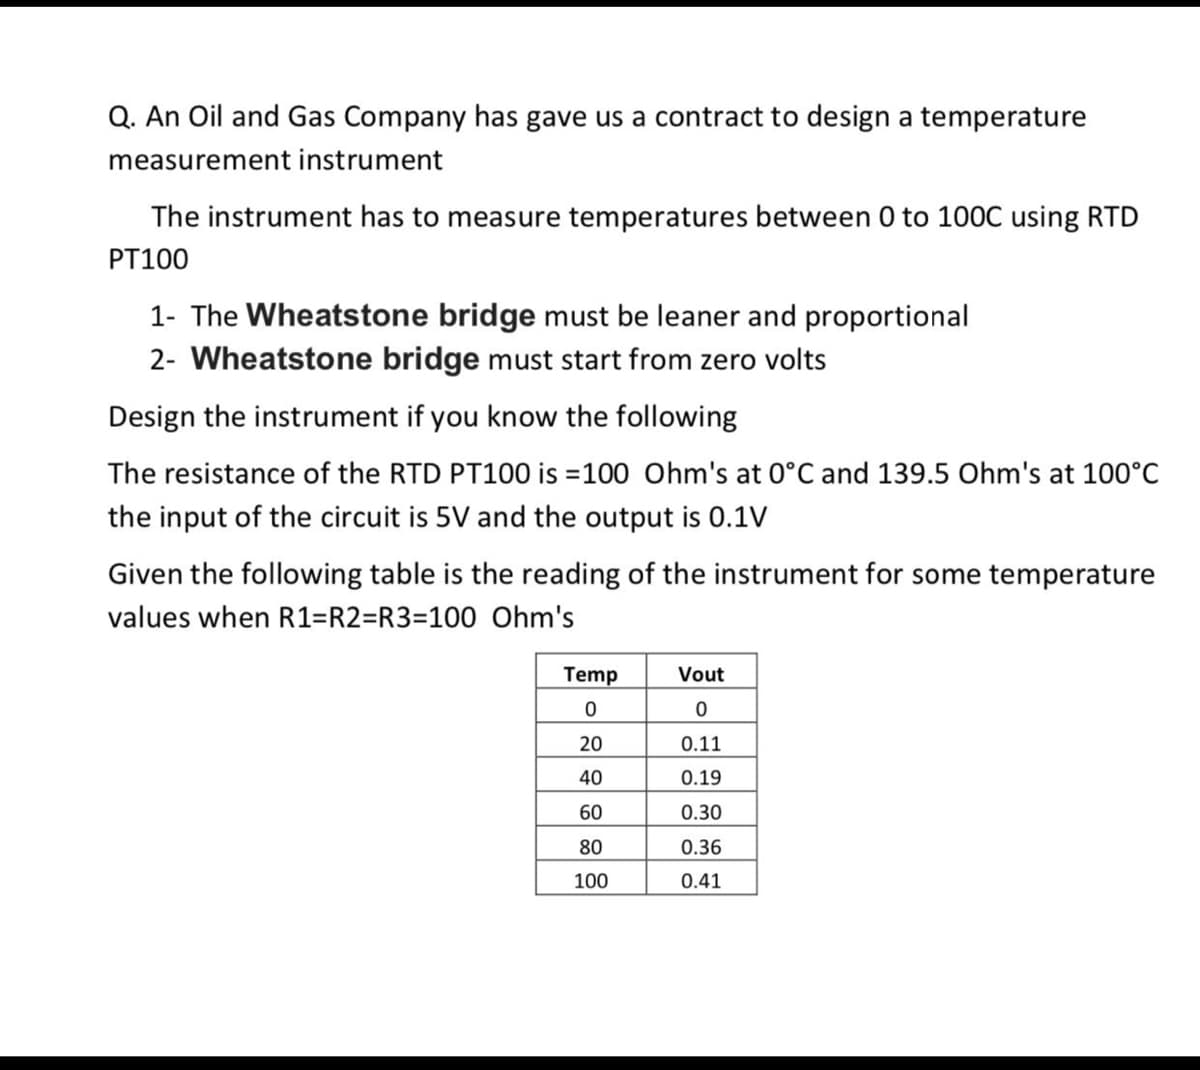 Q. An Oil and Gas Company has gave us a contract to design a temperature
measurement instrument
The instrument has to measure temperatures between 0 to 100C using RTD
PT100
1- The Wheatstone bridge must be leaner and proportional
2- Wheatstone bridge must start from zero volts
Design the instrument if you know the following
The resistance of the RTD PT100 is =100 Ohm's at 0°C and 139.5 Ohm's at 100°C
the input of the circuit is 5V and the output is 0.1V
Given the following table is the reading of the instrument for some temperature
values when R1=R2=R3=100 Ohm's
Temp
Vout
20
0.11
40
0.19
60
0.30
80
0.36
100
0.41
